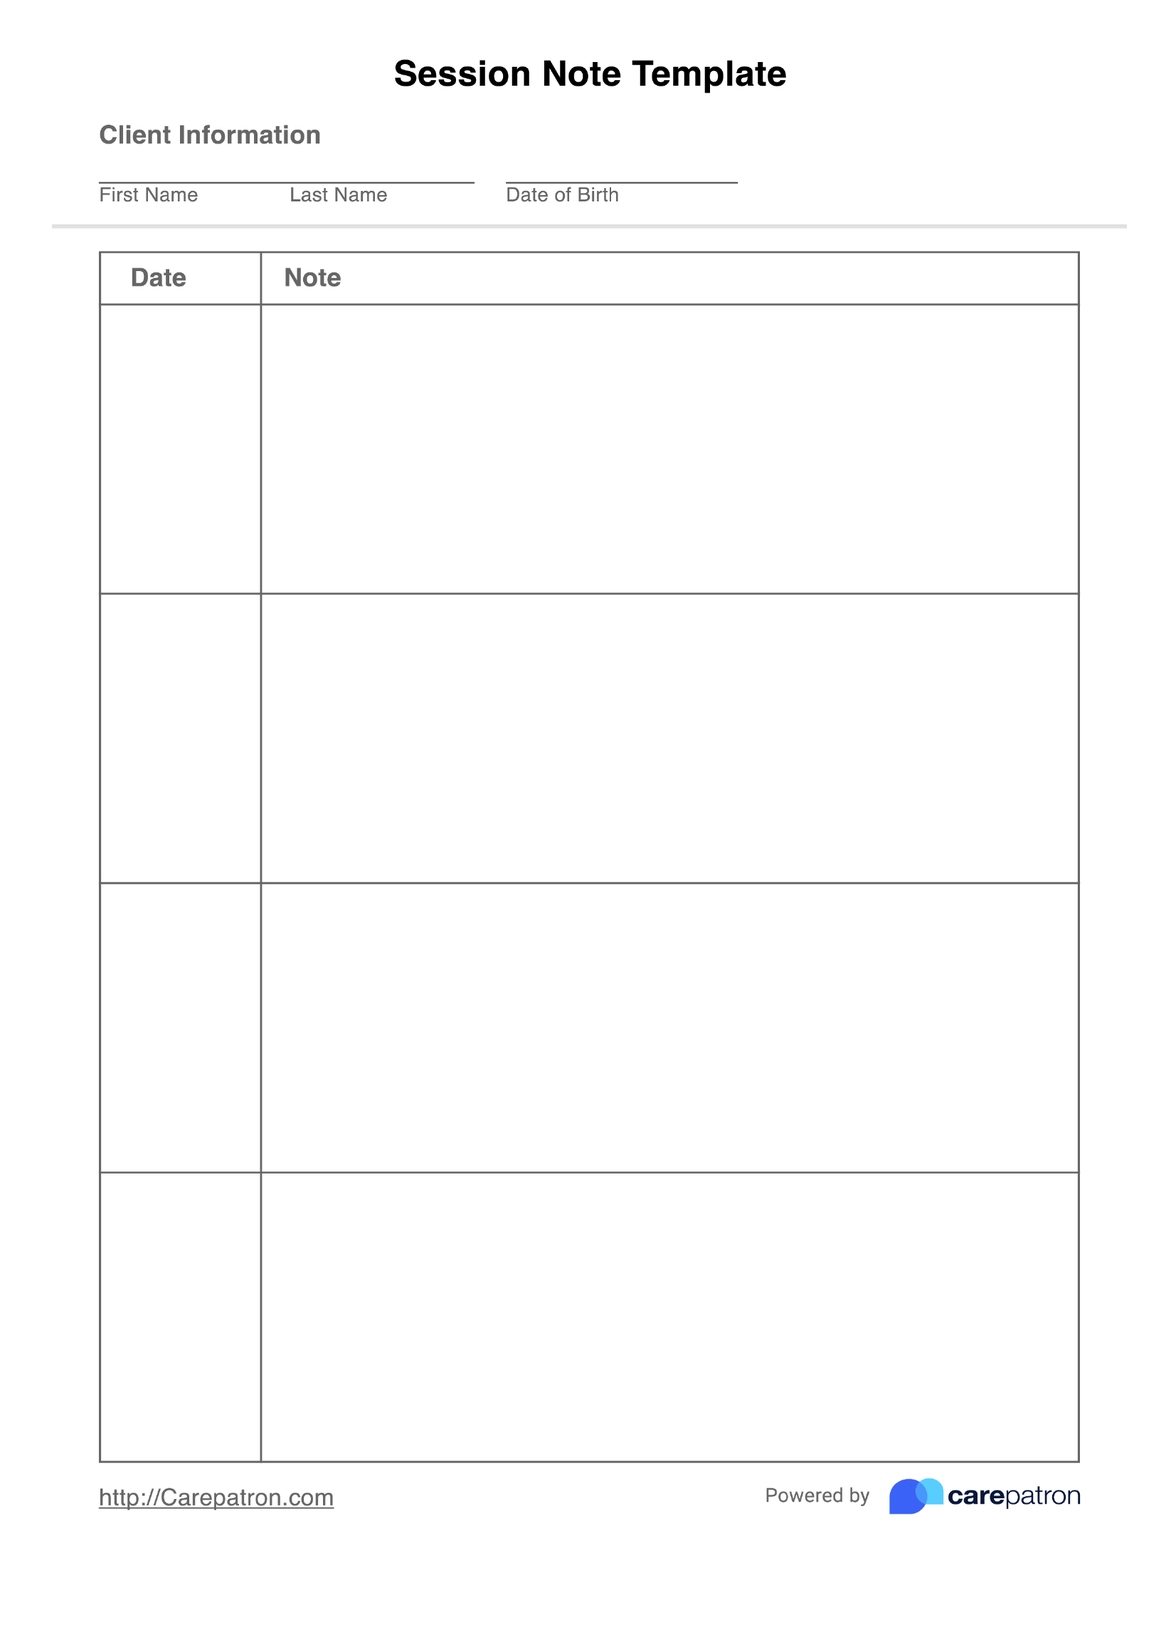 Session Notes Template PDF Example